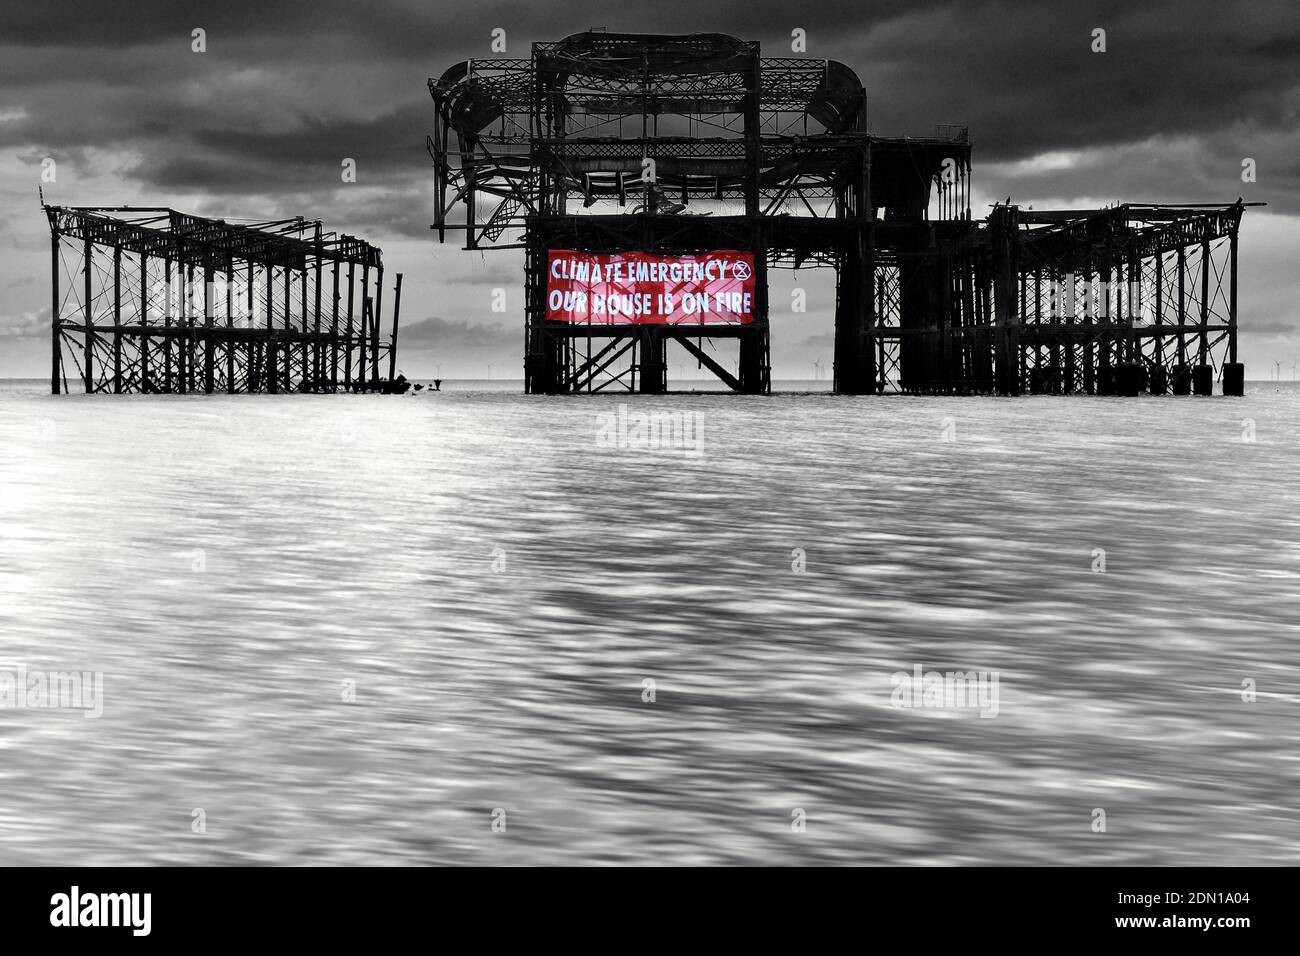 Climate emergency protest banner on west pier. Stock Photo